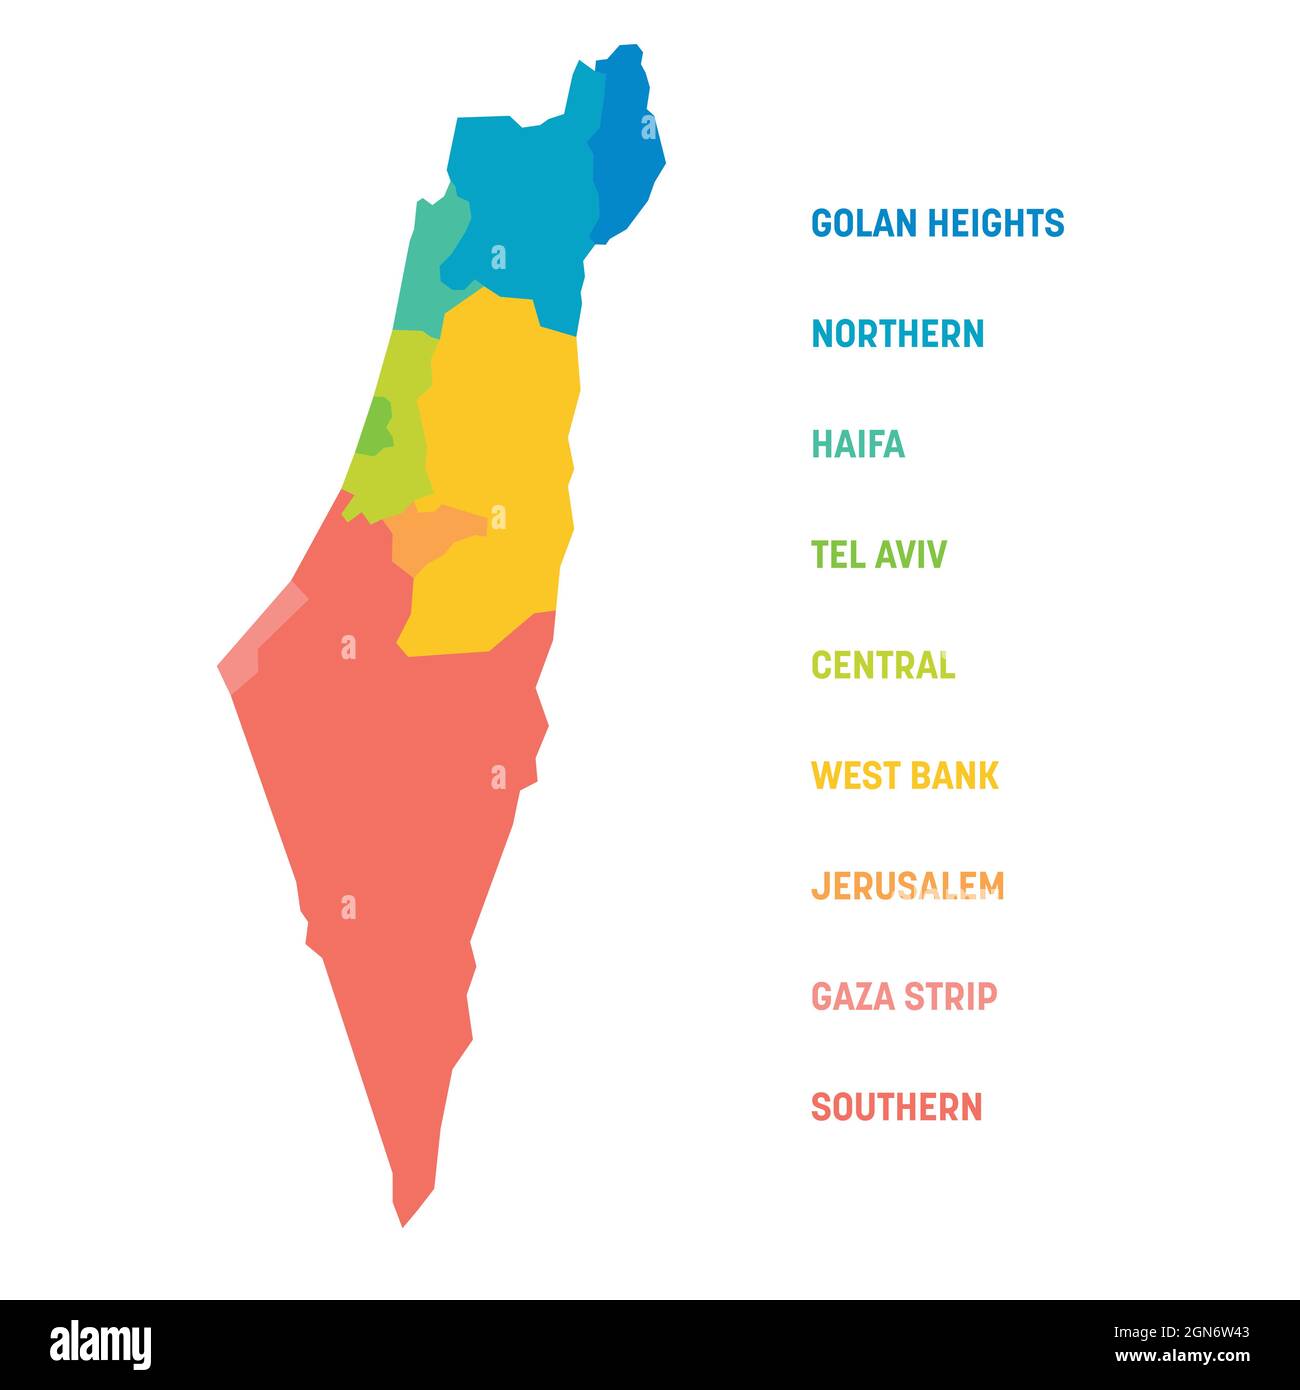 Colorful political map of Israel. Administrative divisions - districts and three special territories - Gaza Strip, West Bank and Golan Heights. Simple flat vector map with labels. Stock Vector